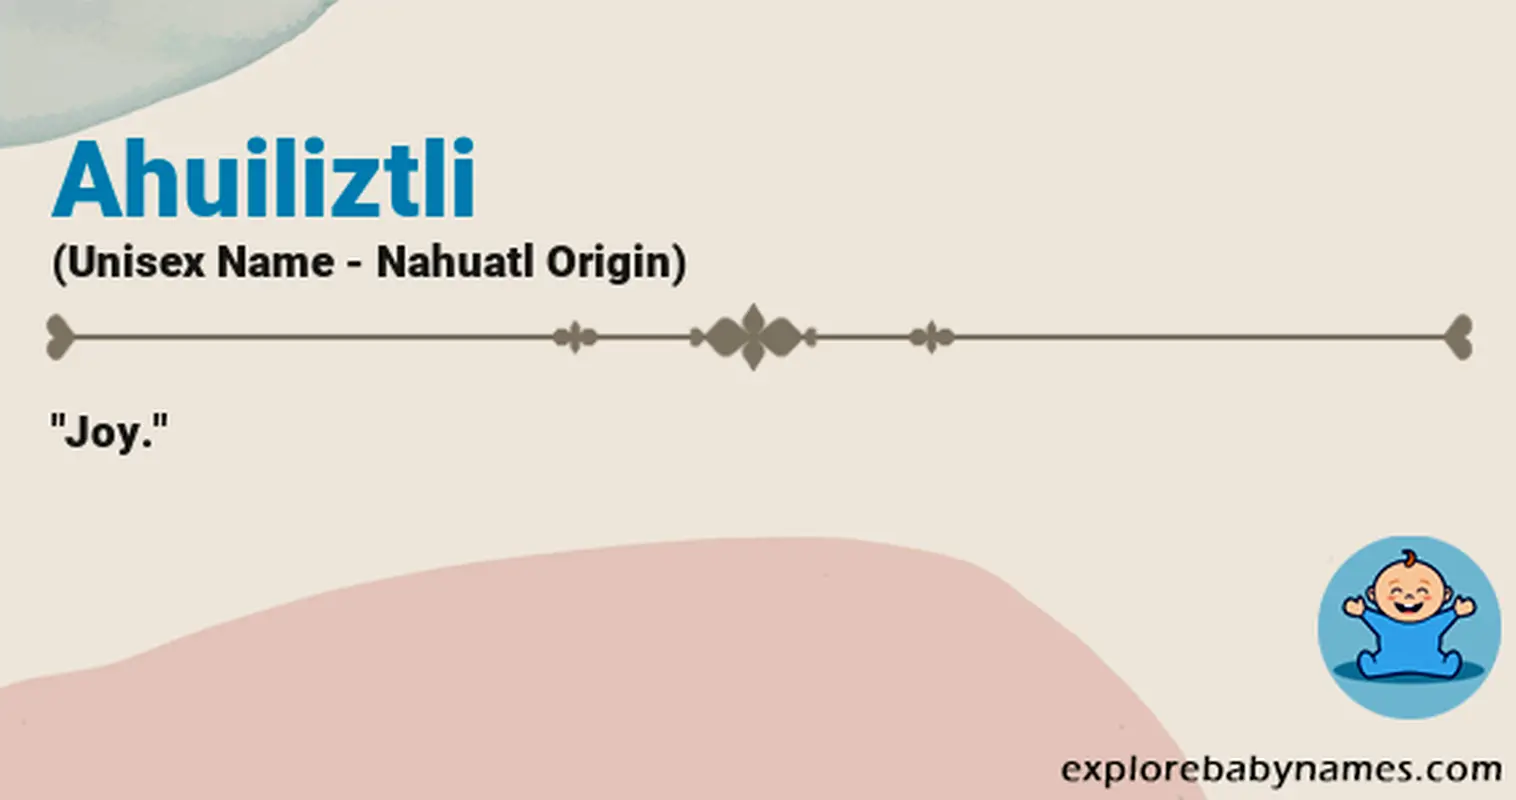 Meaning of Ahuiliztli